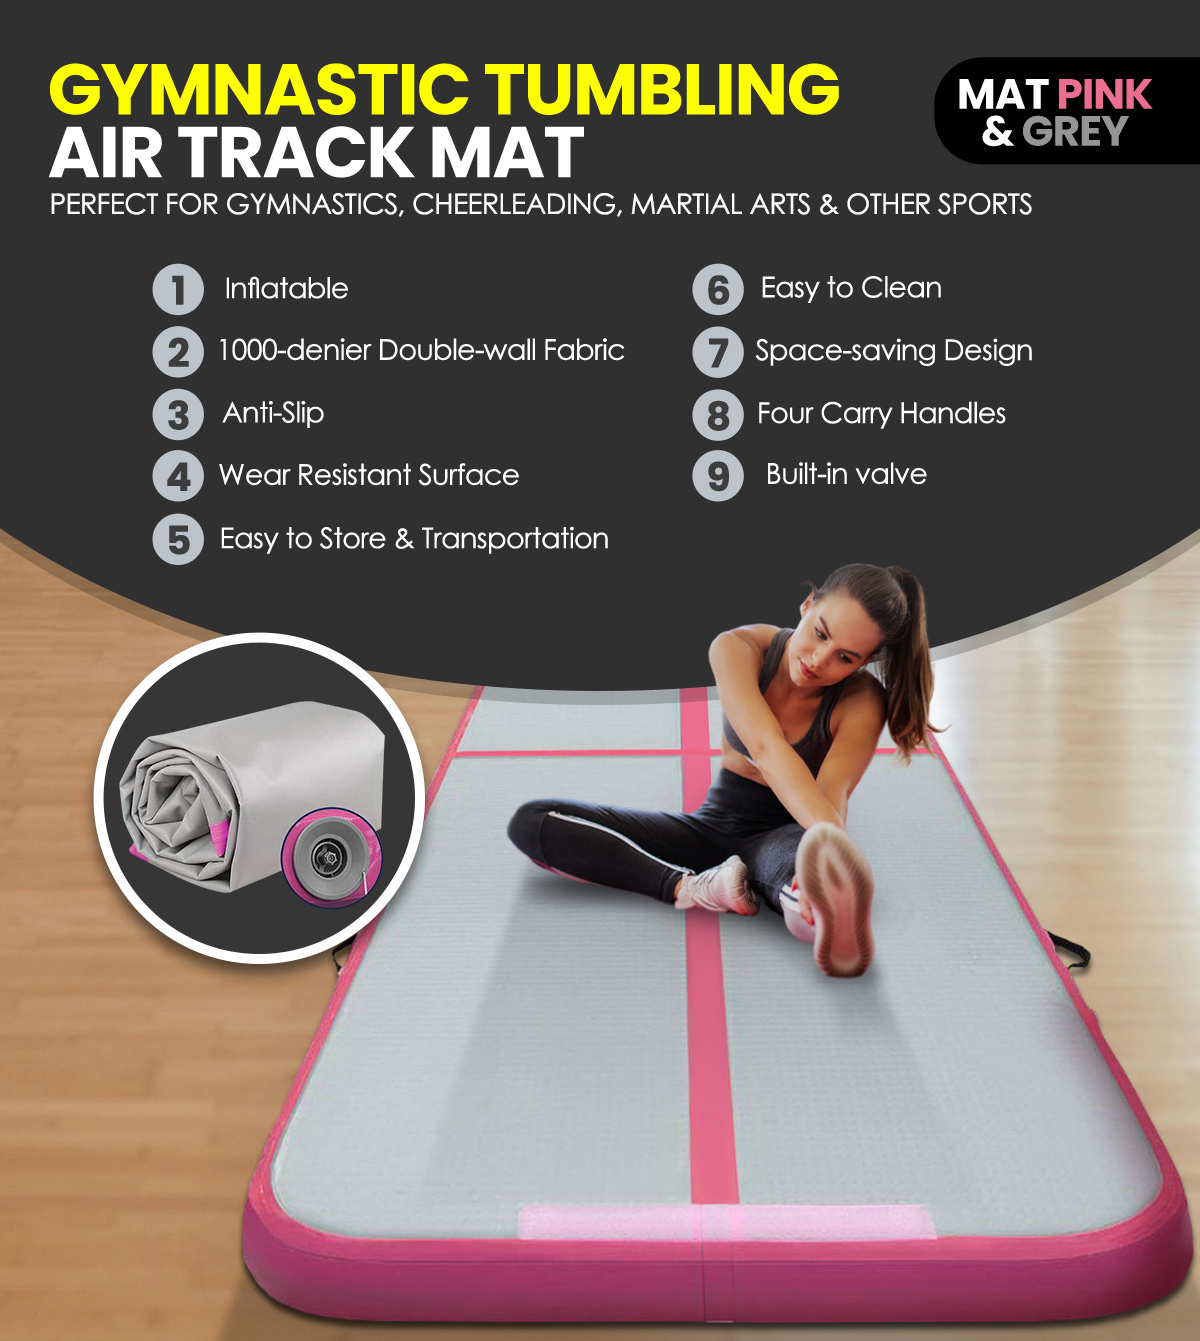 Gymnastic 3m x 1m Gym Air Track Mat Tumbling Pink and Grey 10cm Thick